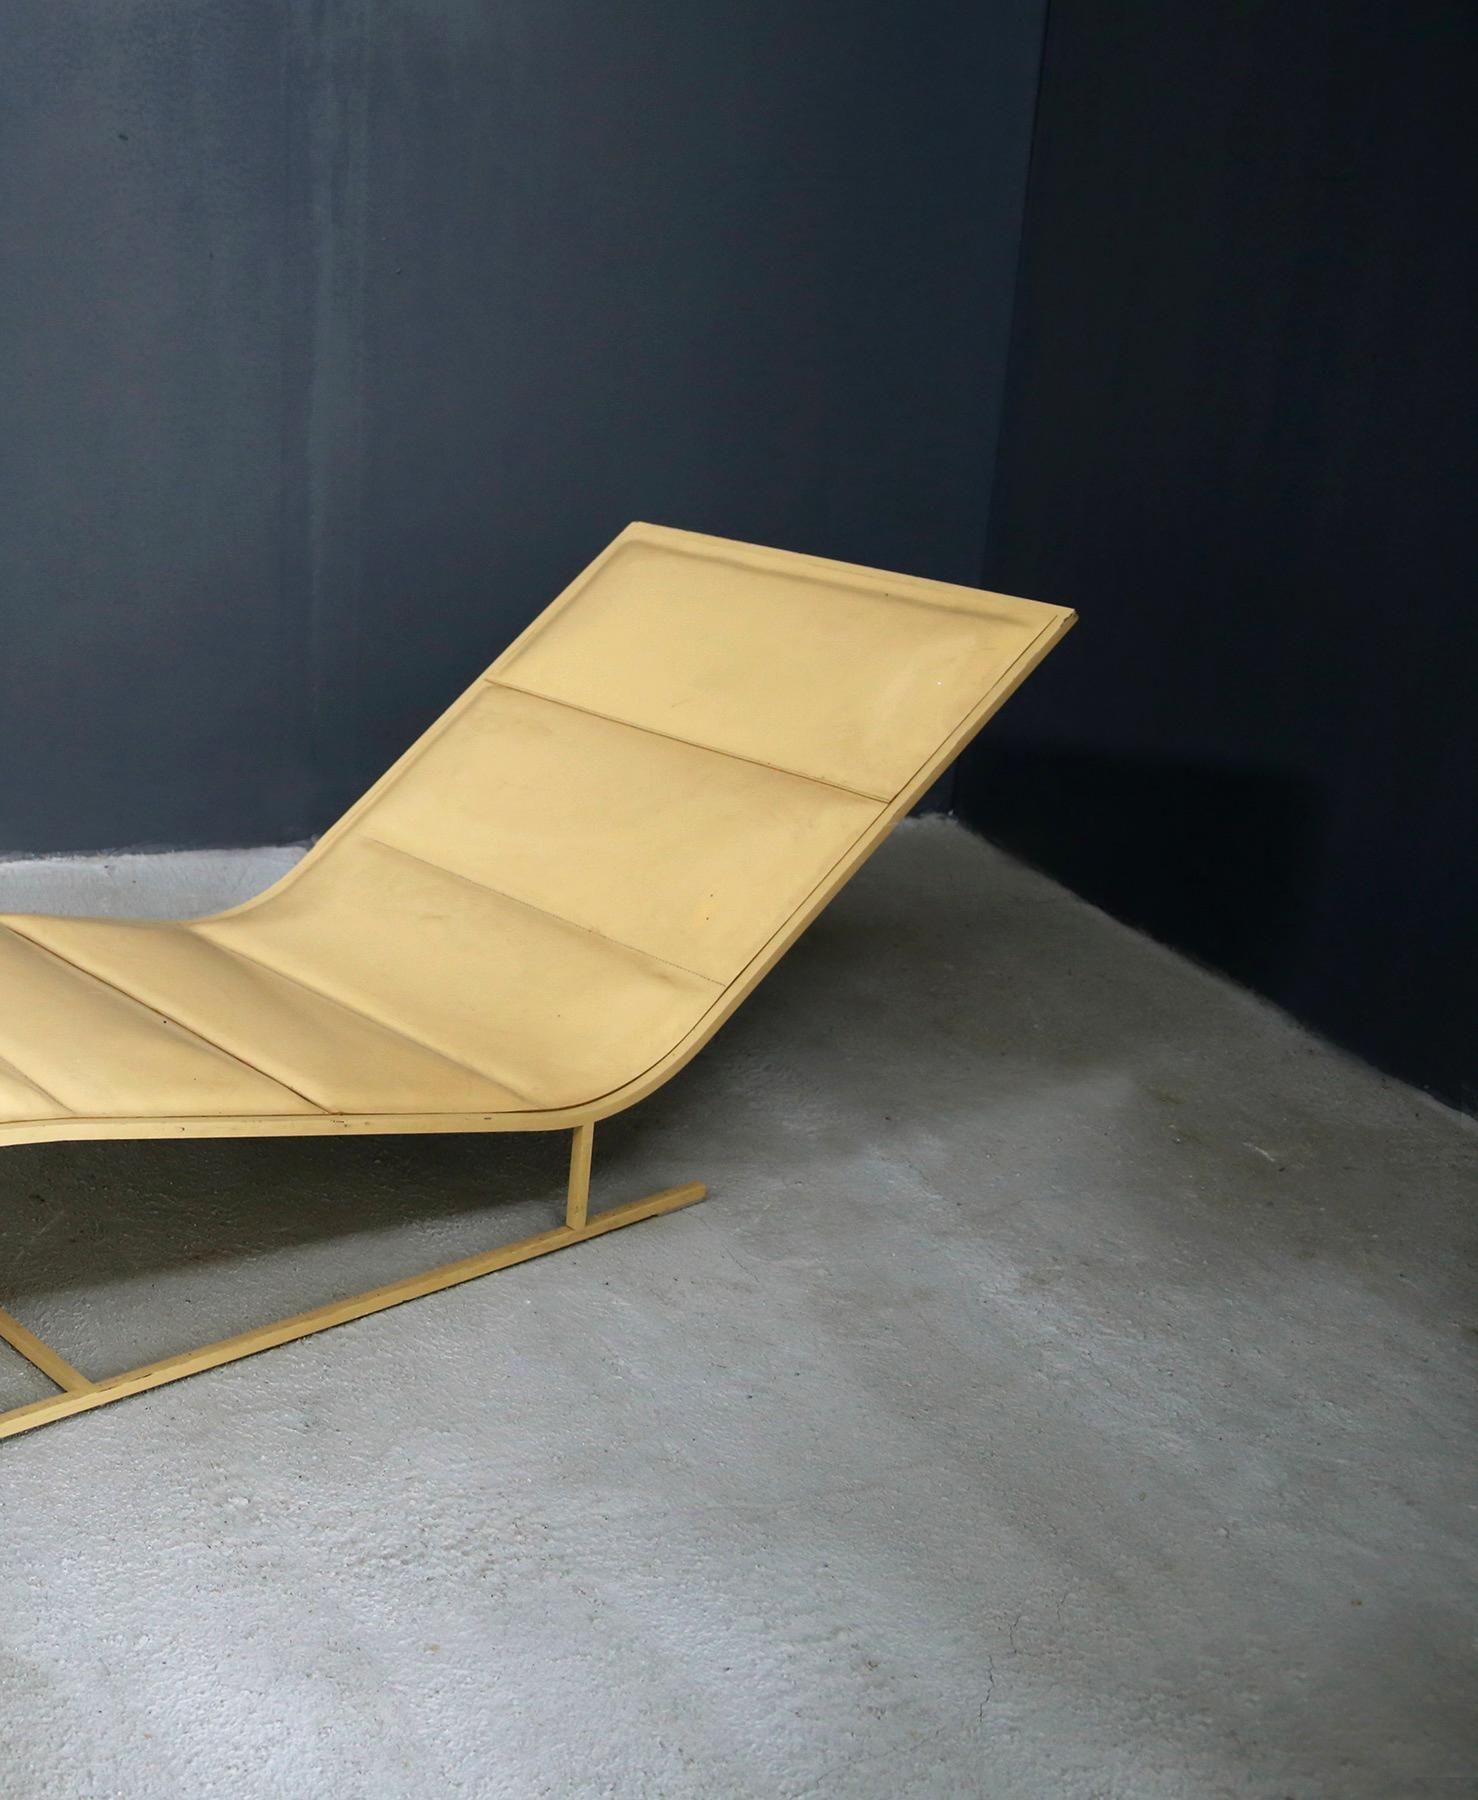 Chaise Lounge Midcentury French Manufacture in Iron and Skin Form, 1950s (Französisch)